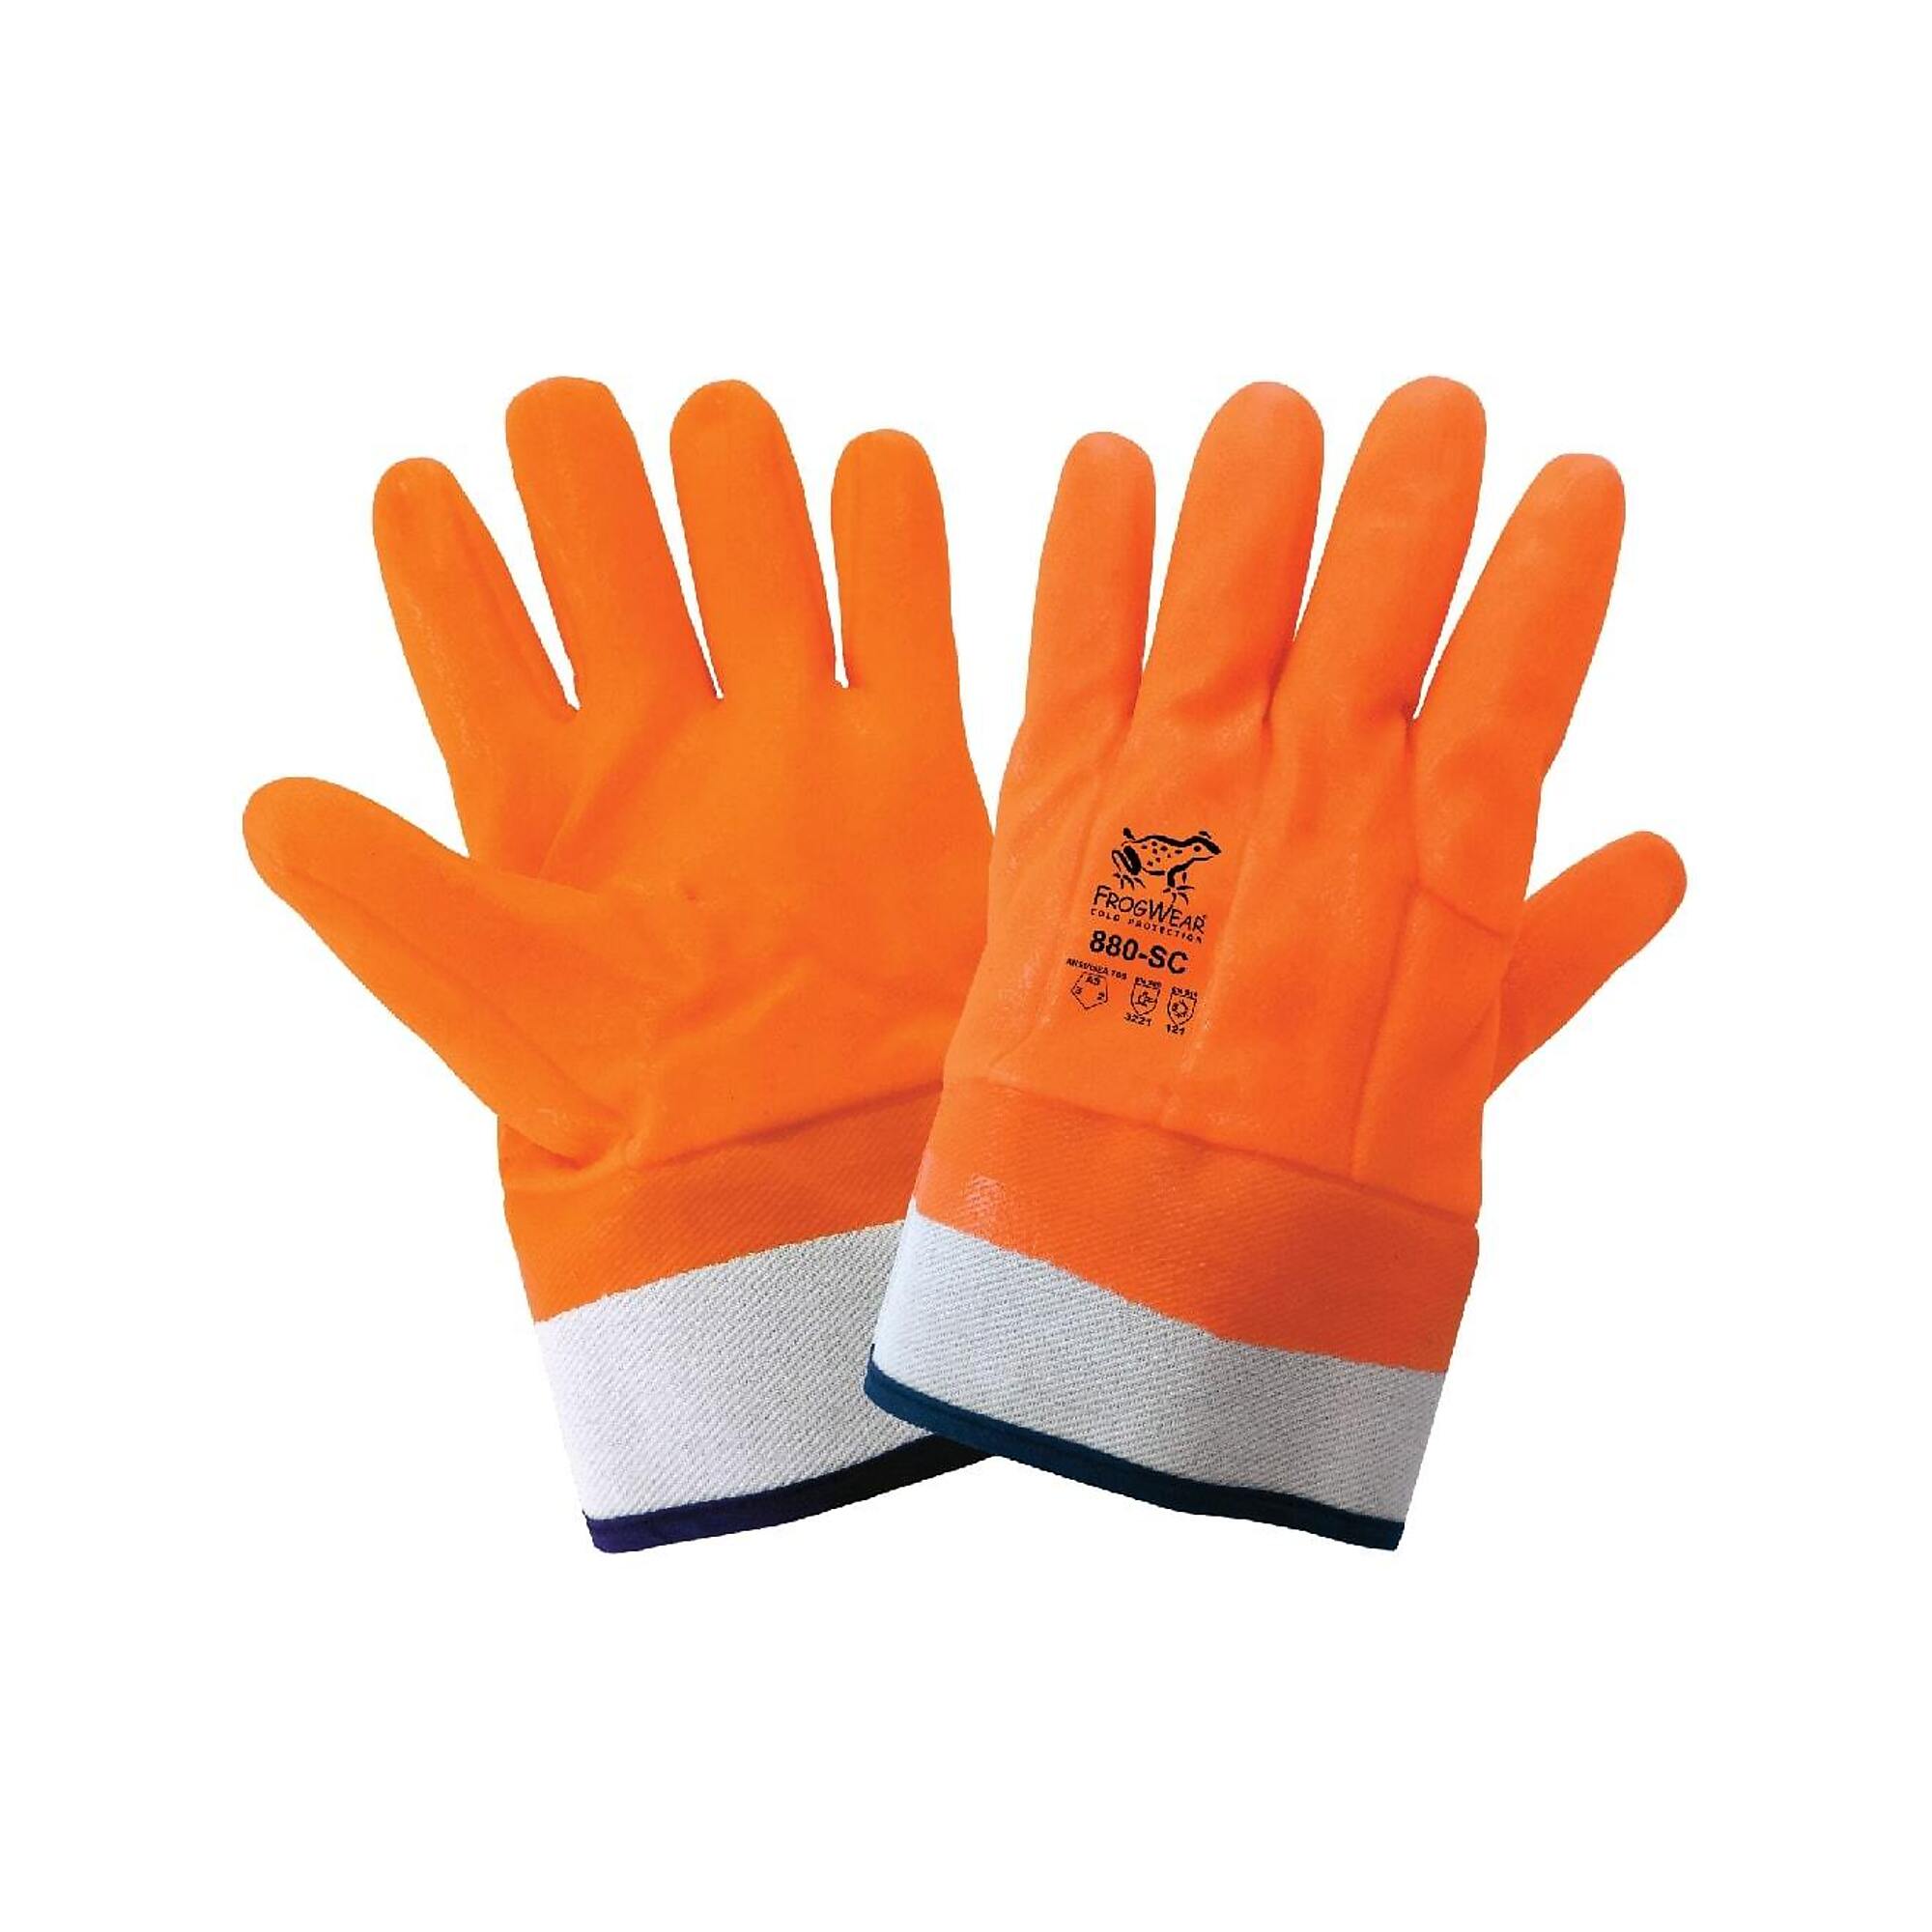 FrogWear, HV Org, Insulated, Dbl PVC Coat, Cut Res A3 Gloves- 12 Pairs, Size One Size, Color High-Visibility Orange, Included (qty.) 12 Model 880-SC